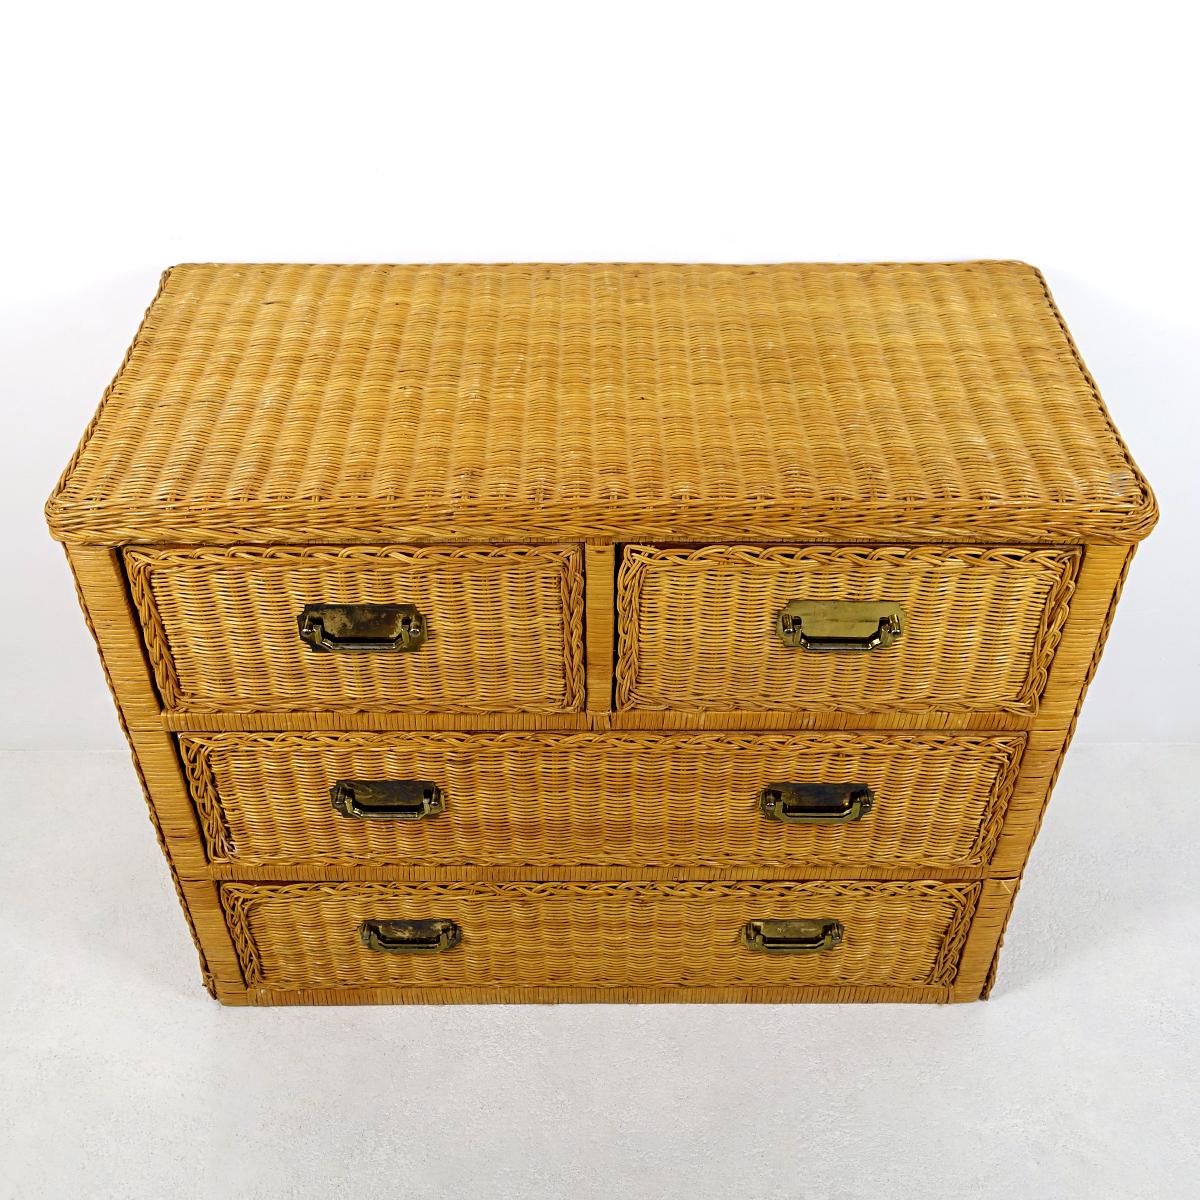 Charming chest of drawers made of rattan in colonial style with four wooden drawers, two smaller ones on the 